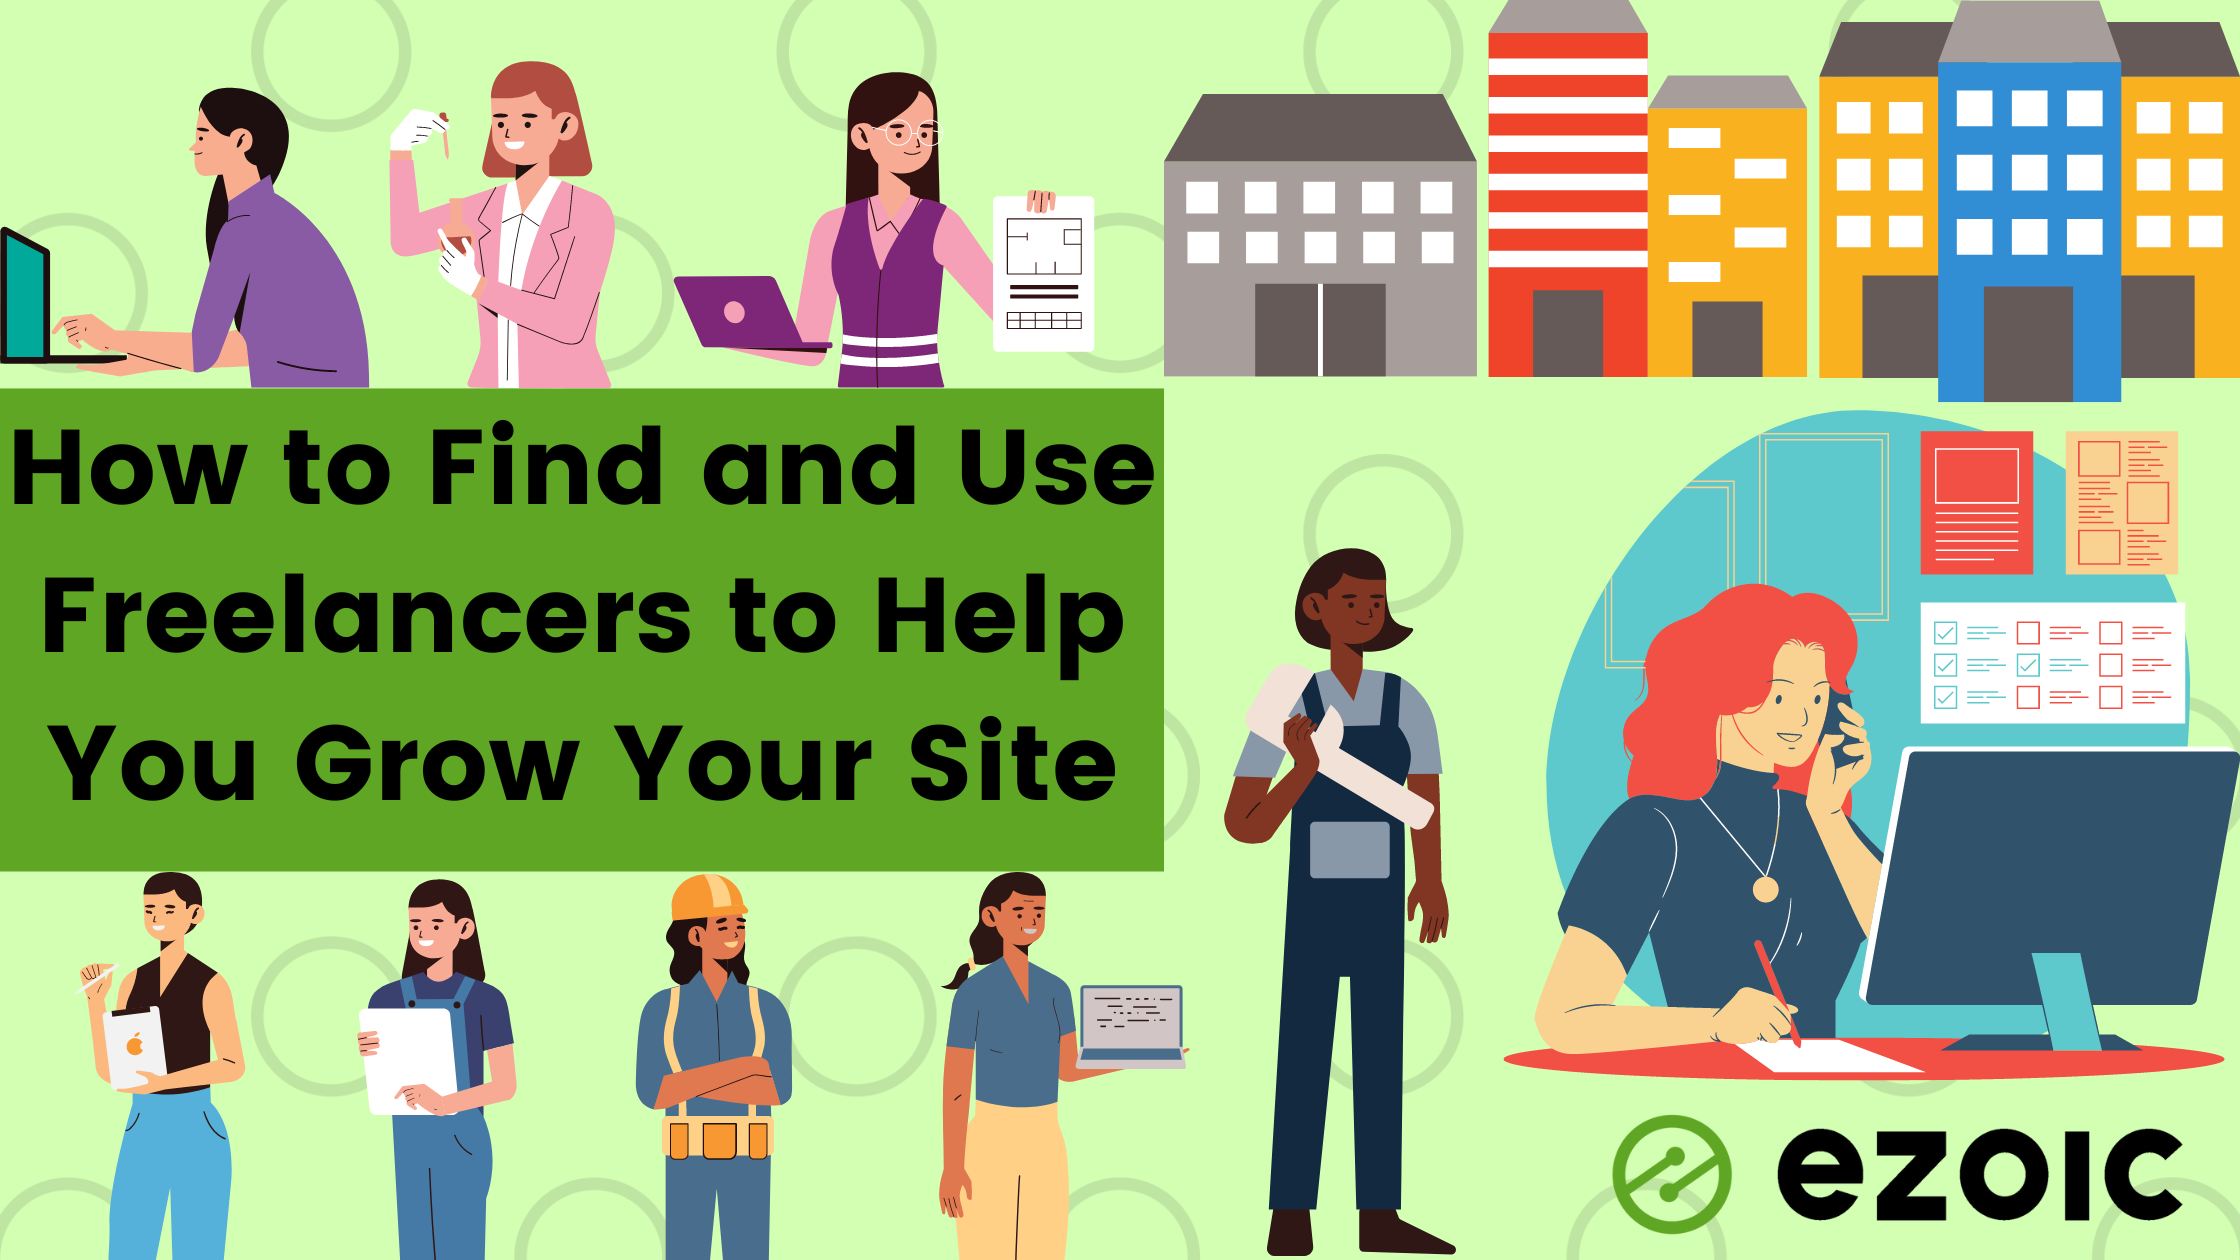 How to Find and Use Freelancers to Help You Grow Your Site